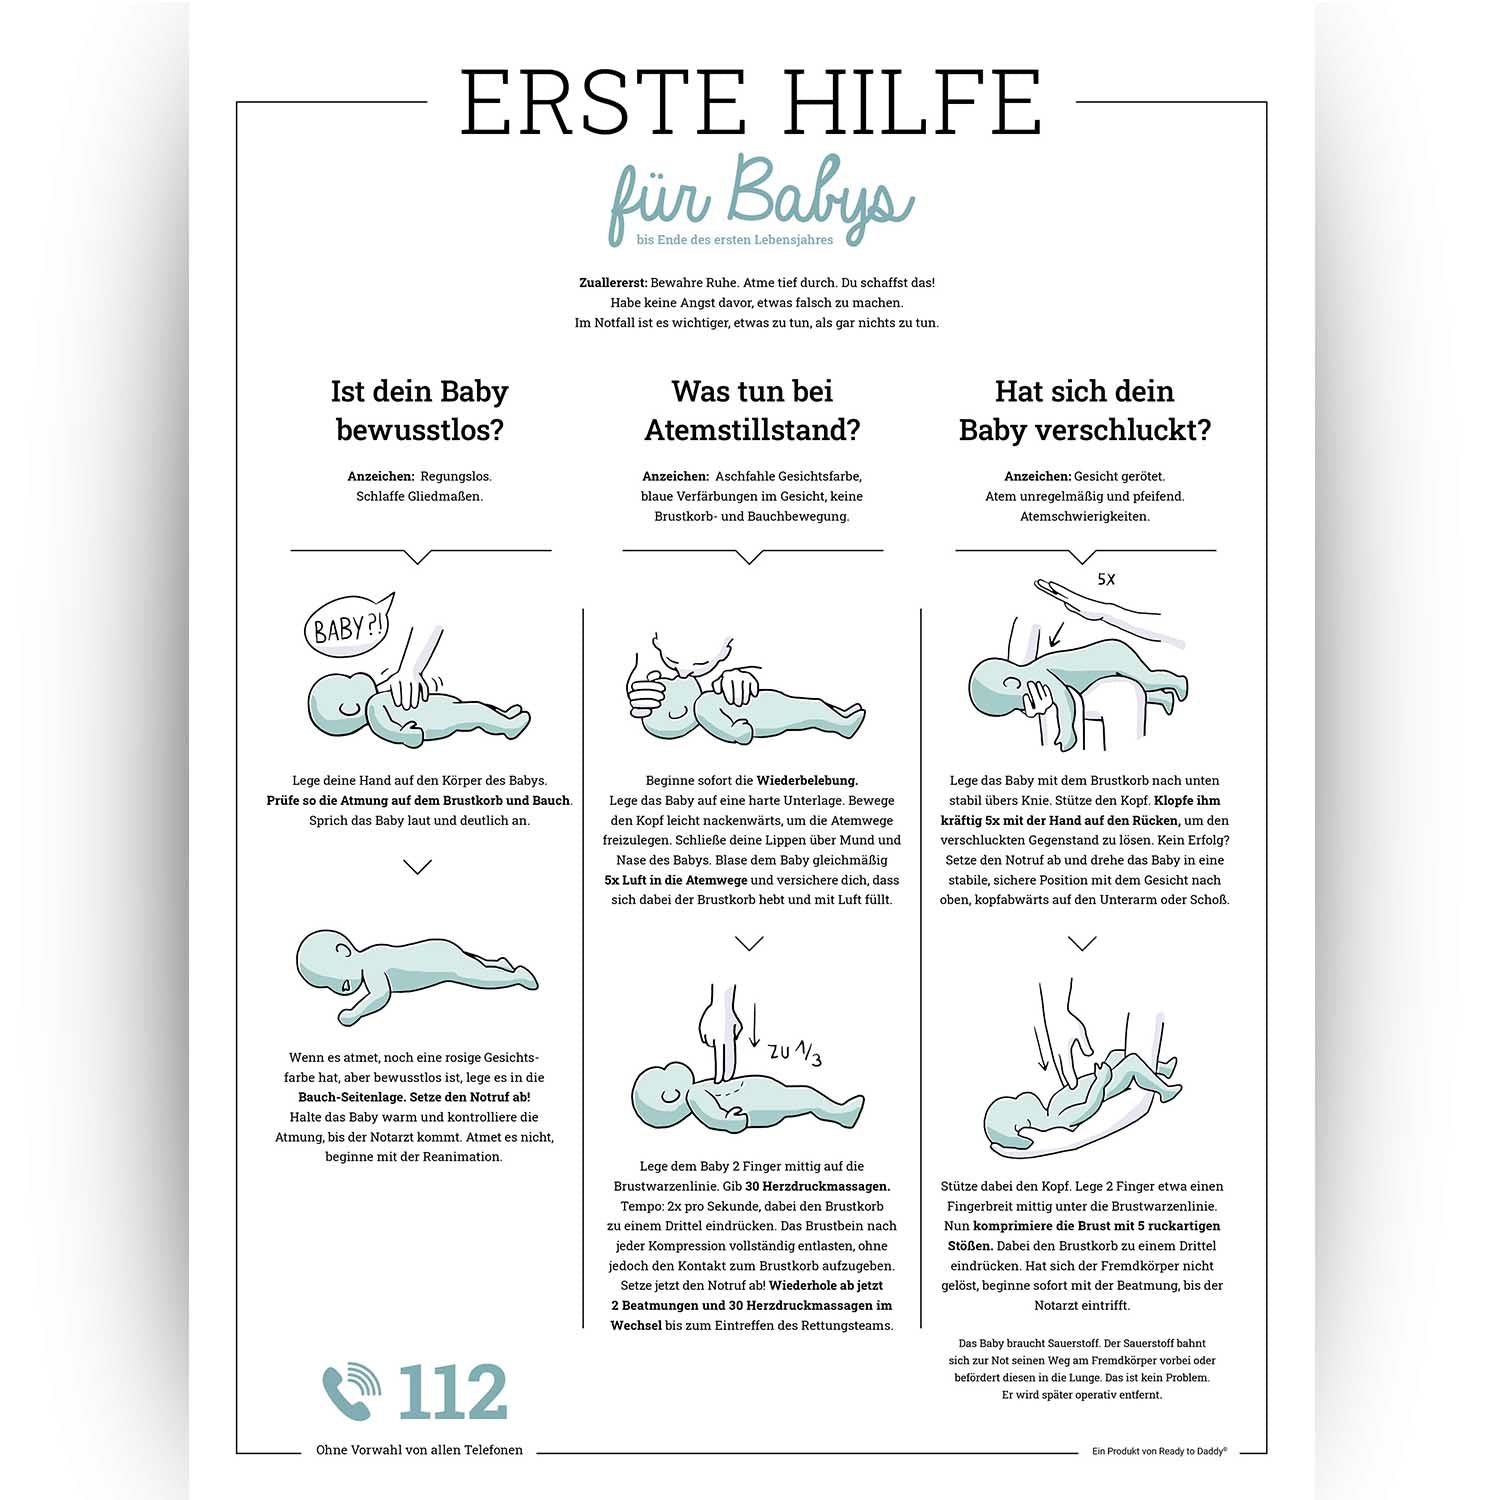 ERSTE HILFE für Babies - Poster - Ready to Daddy Products UG